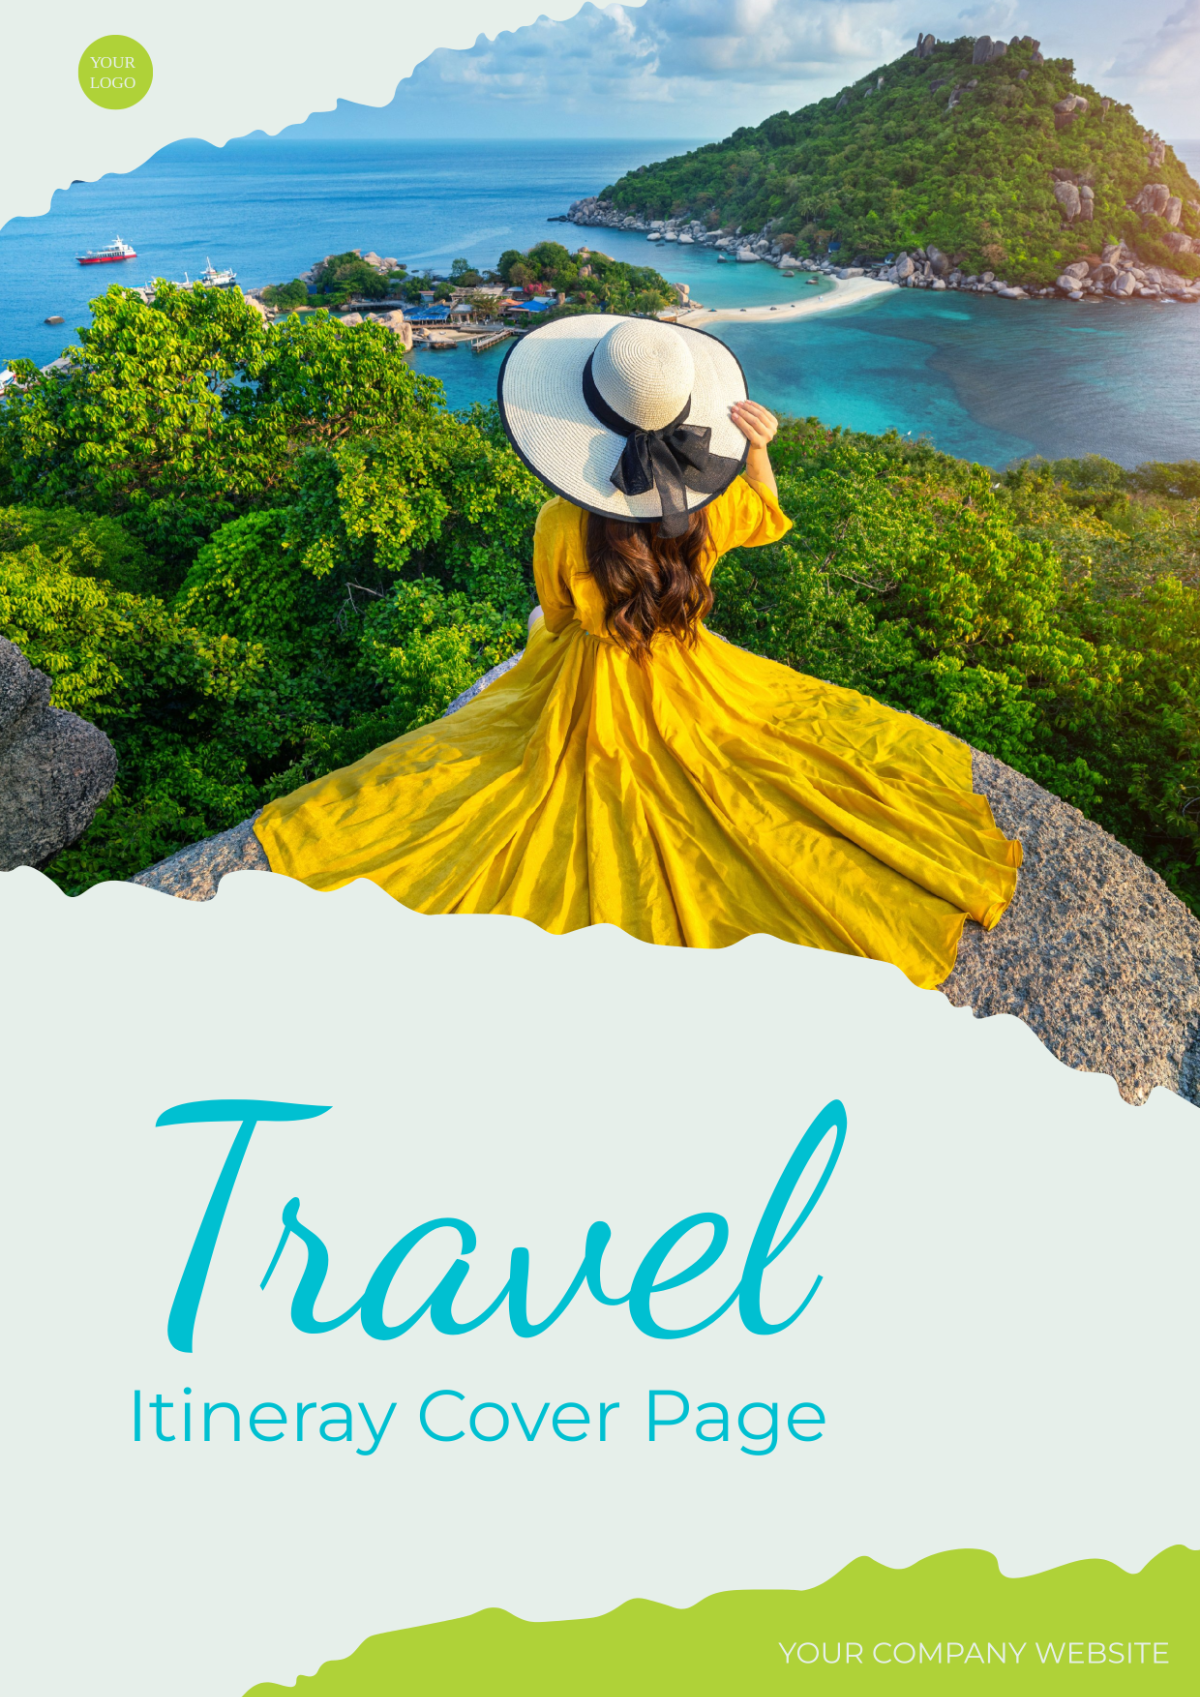 Travel Itinerary Cover Page